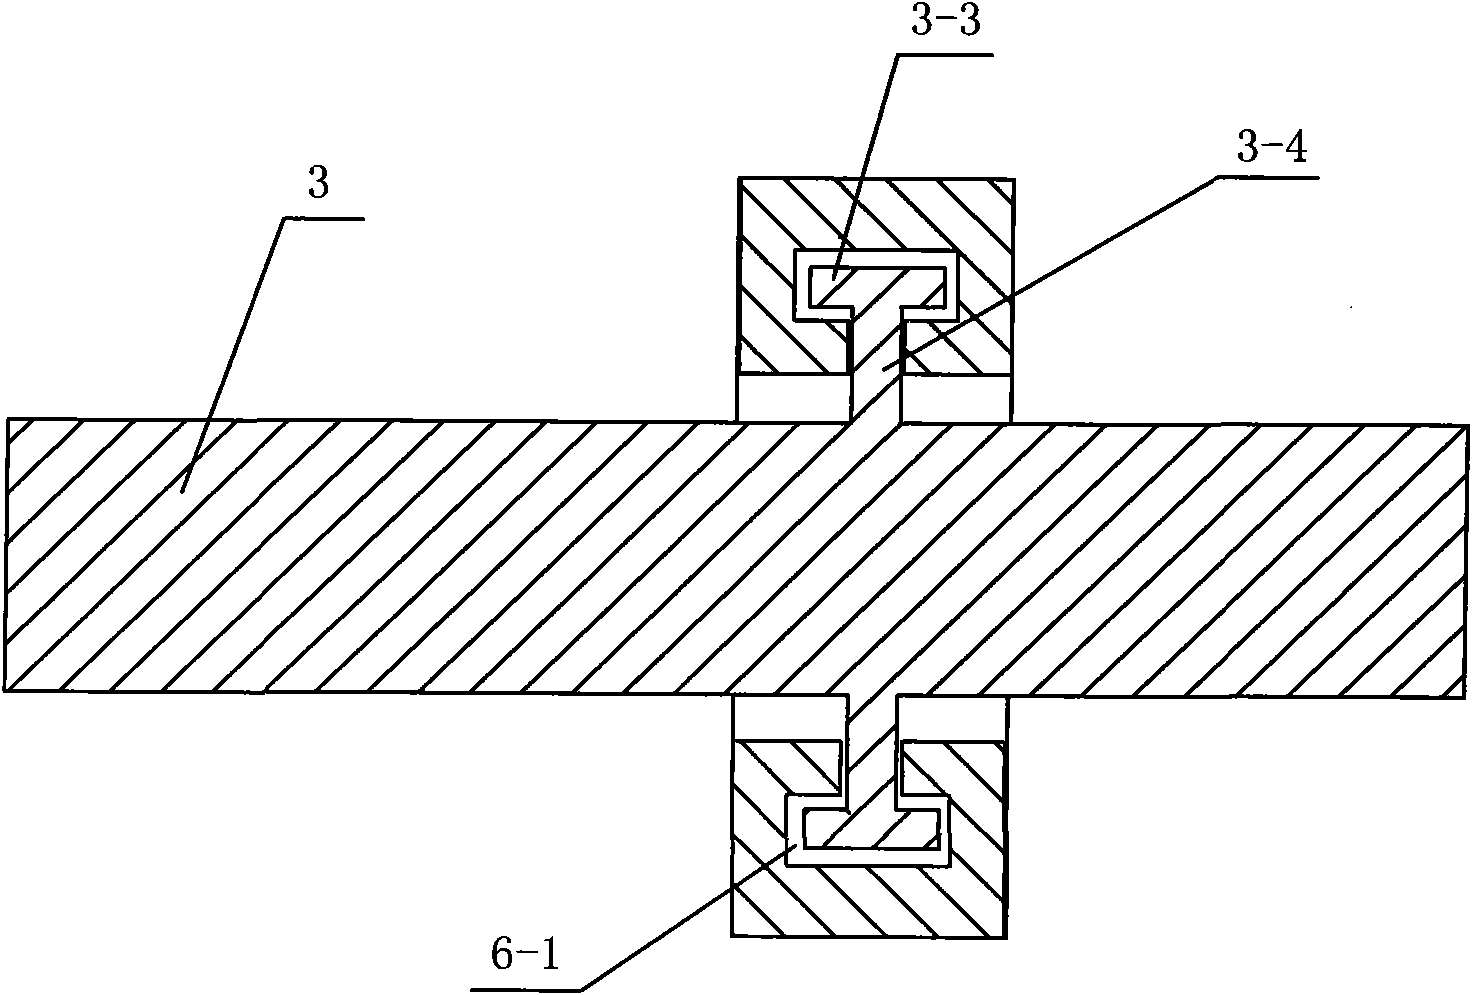 Self-balancing type chassis for four-wheel vehicle